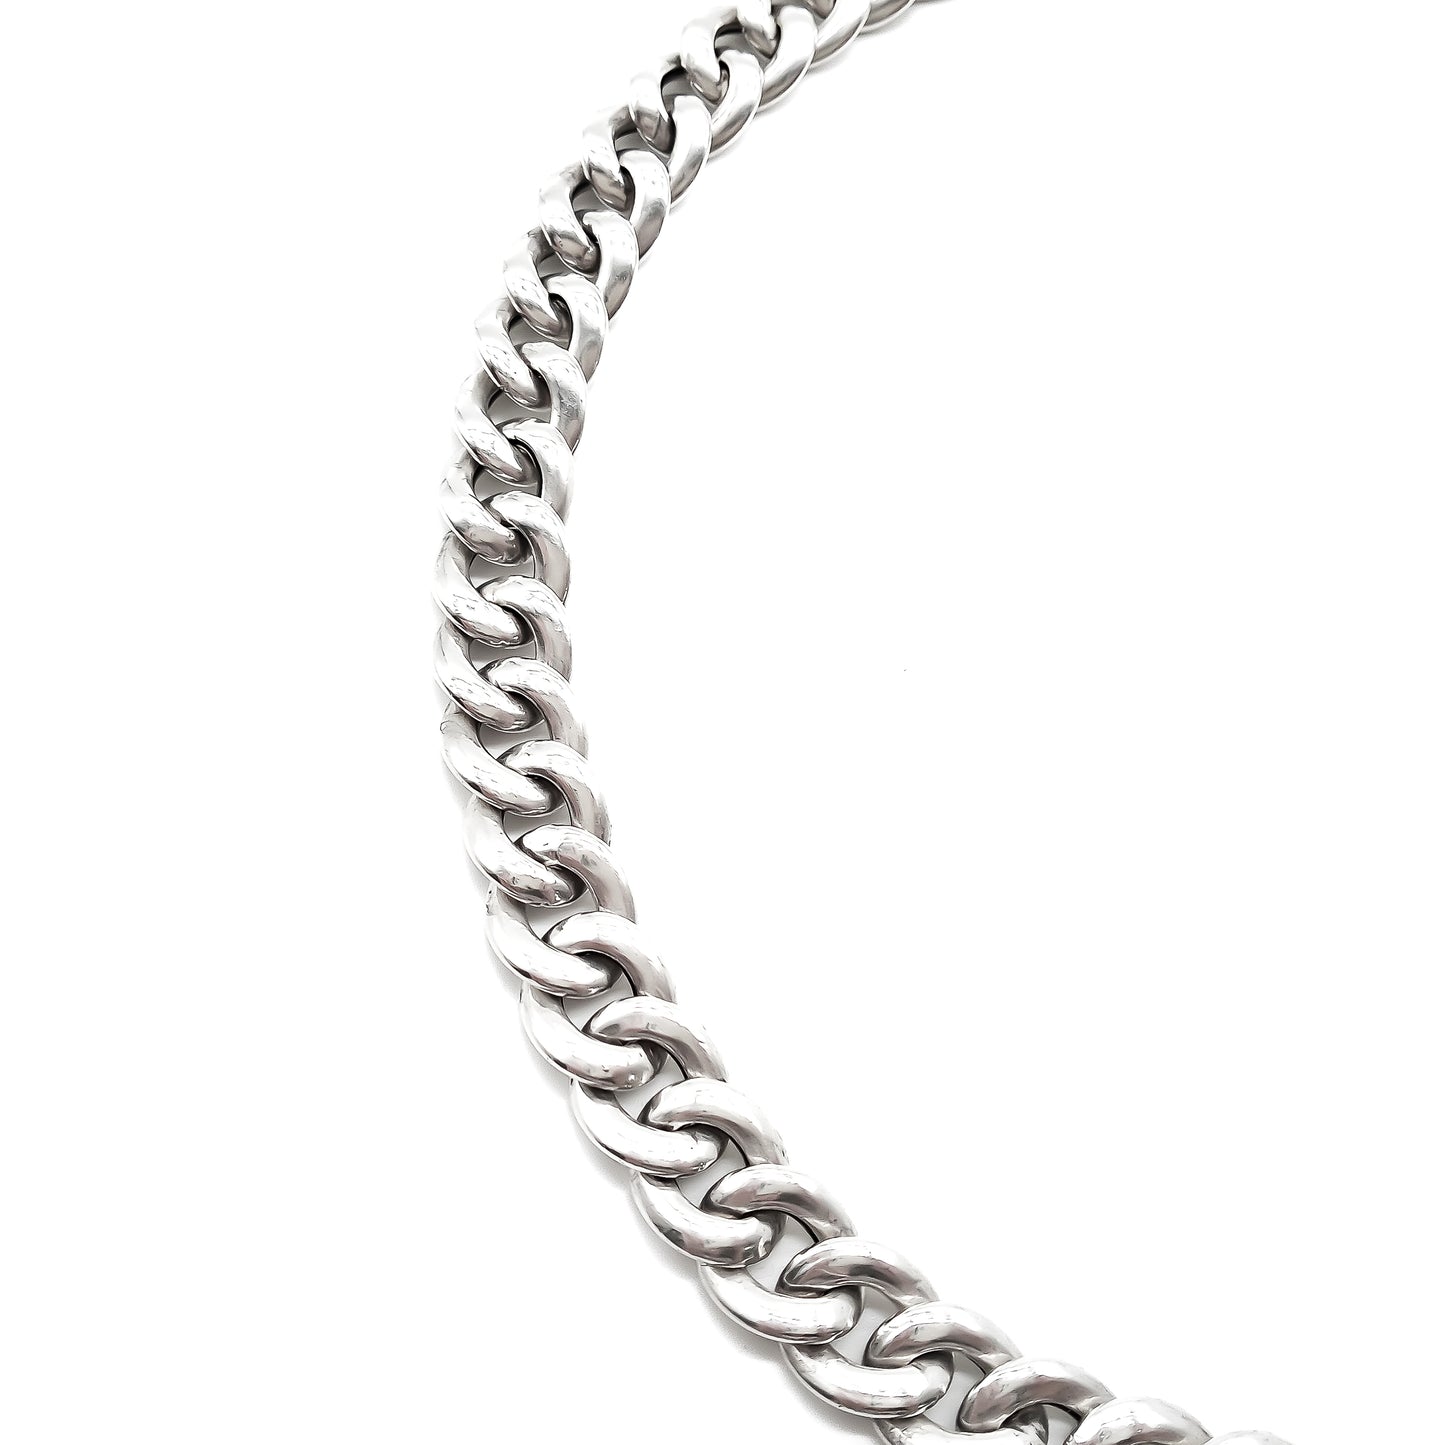 Classic vintage sterling silver chain with large belcher links.